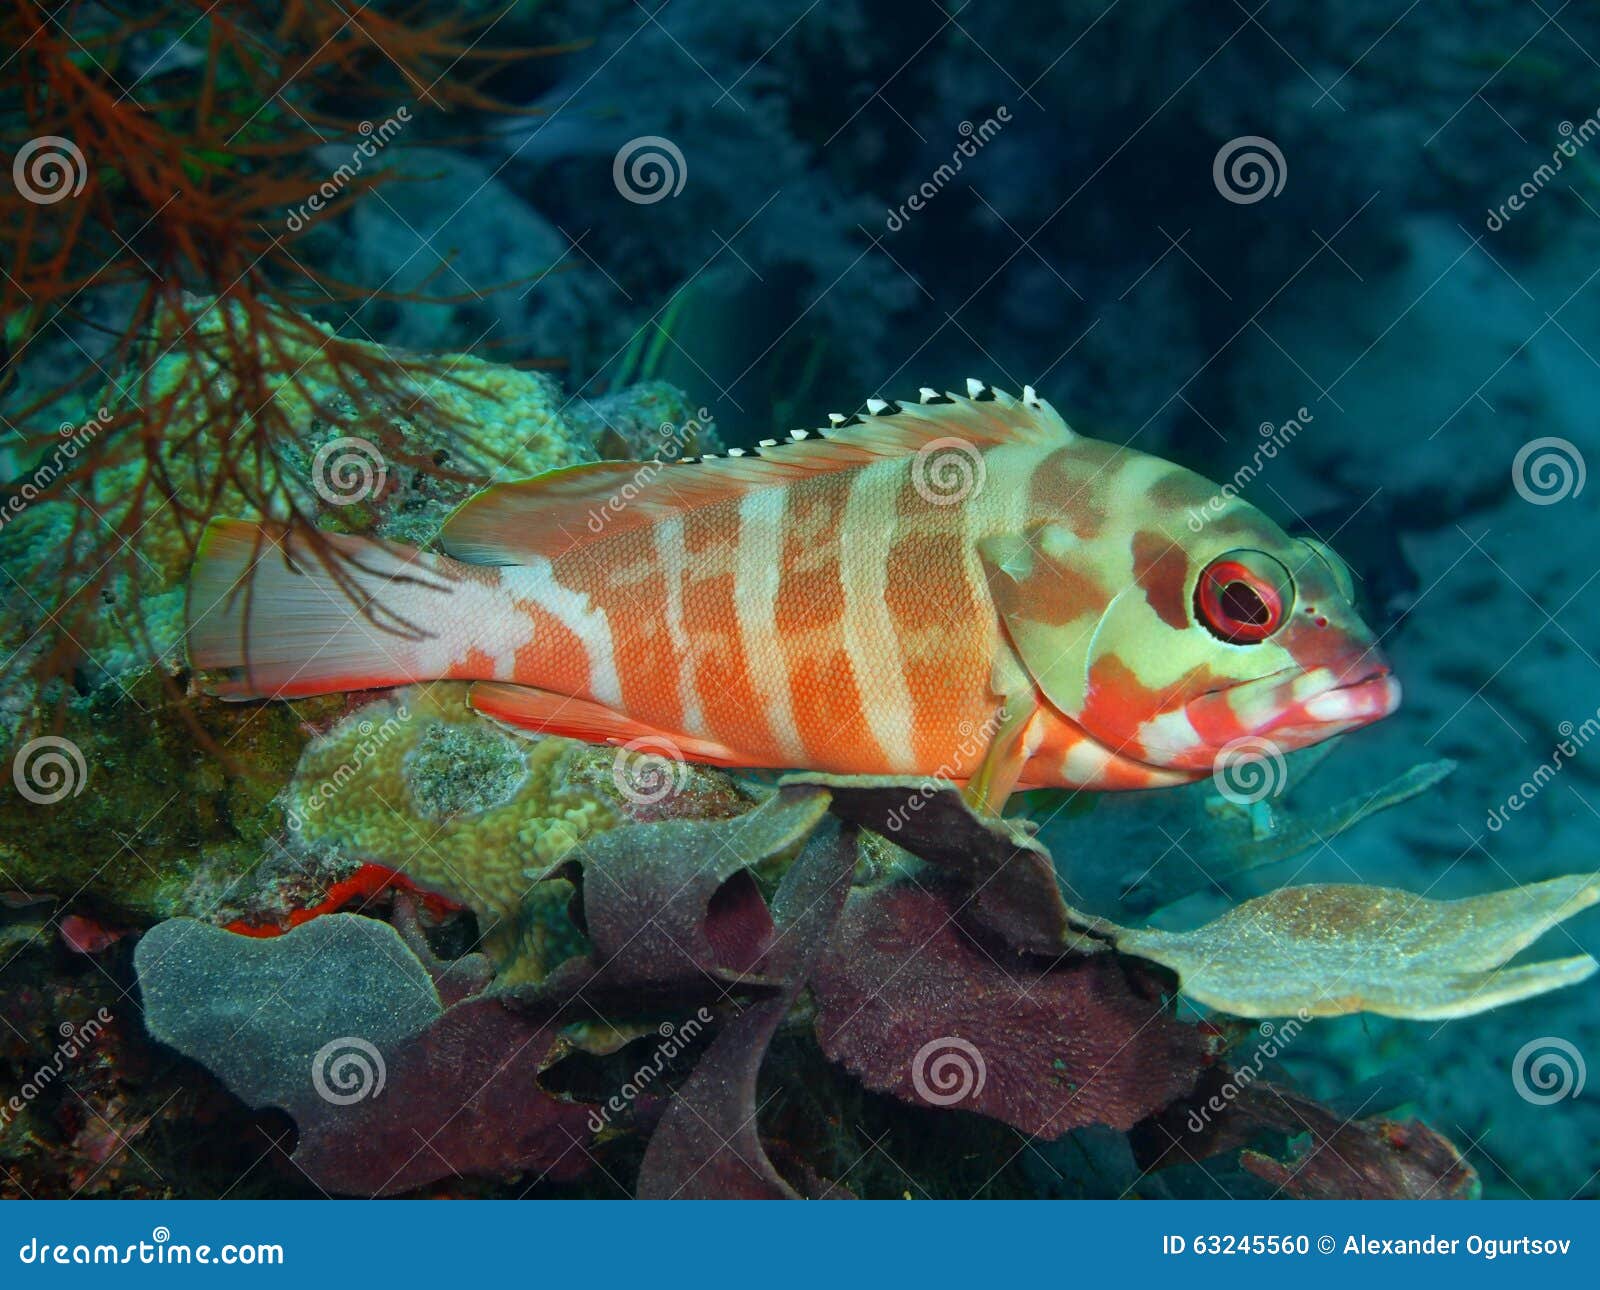 Grouper stock photo. Image of water, coral, fish, tropic - 63245560